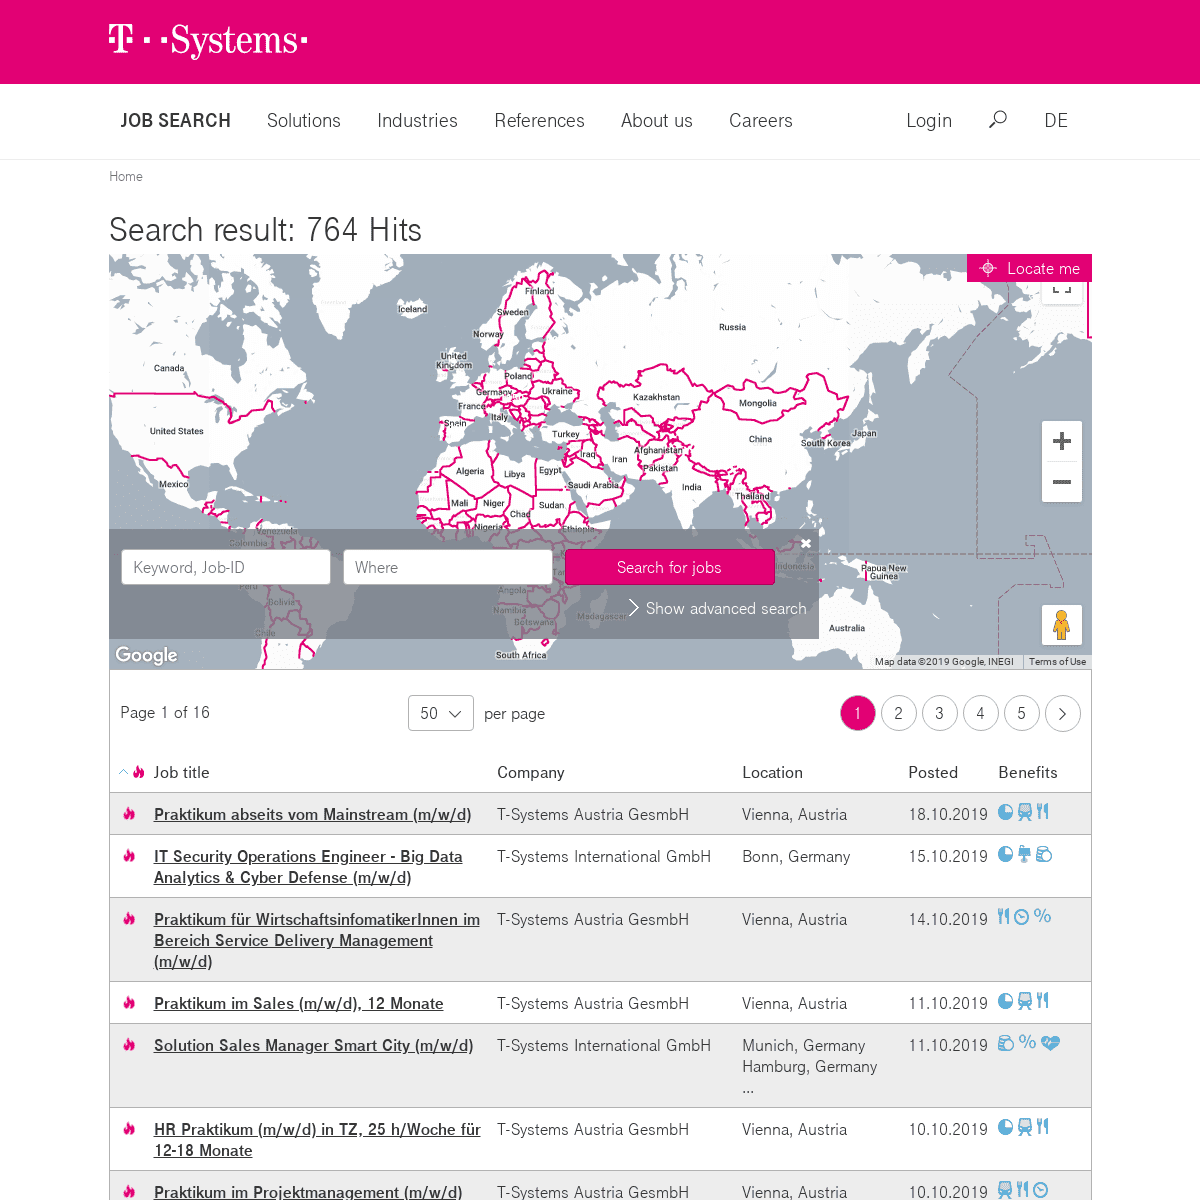 A complete backup of t-systems.jobs